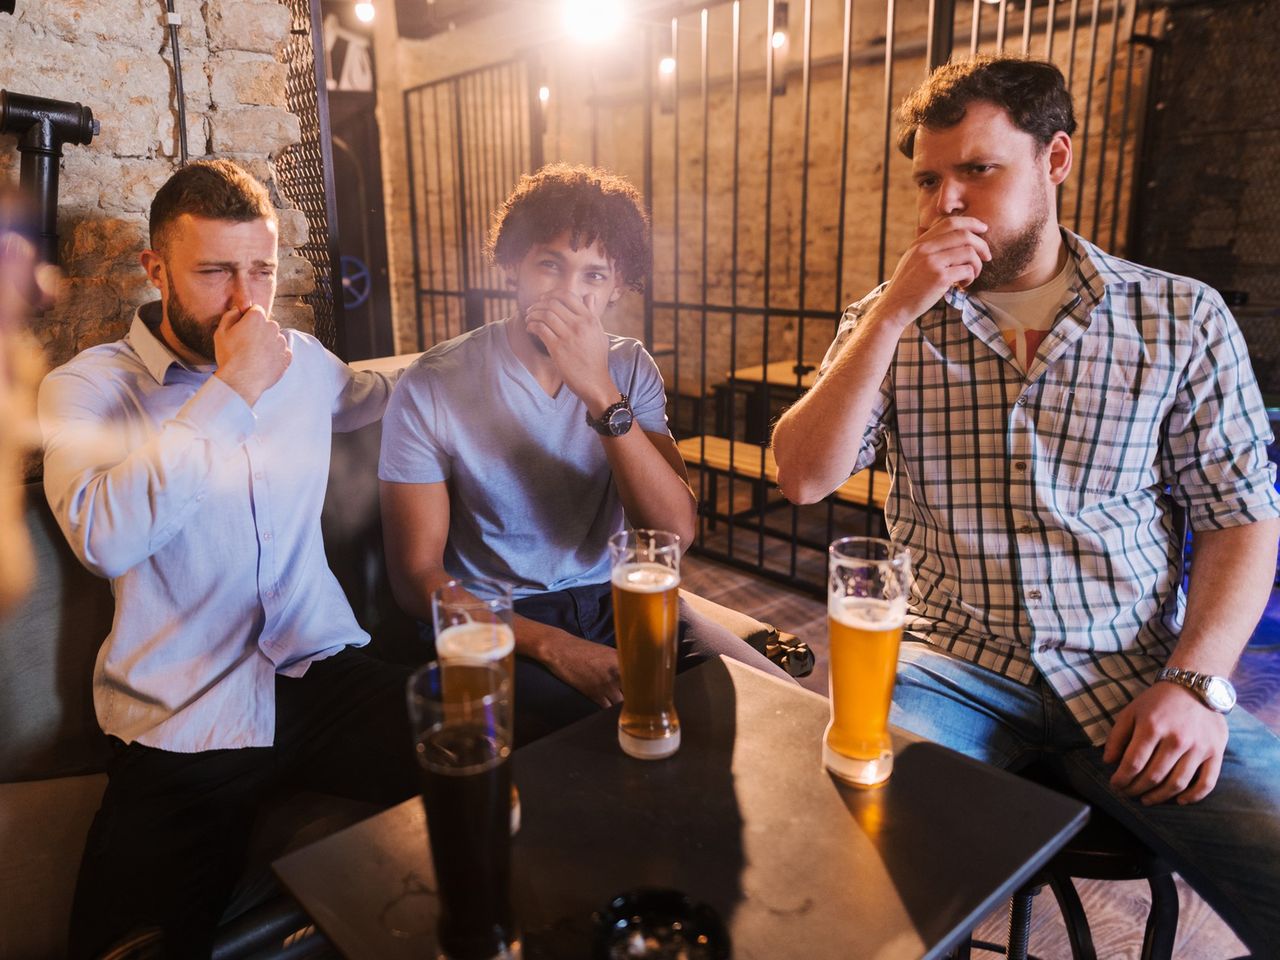 Man smoking in pub and his friends coughing. Anti smoking concept.